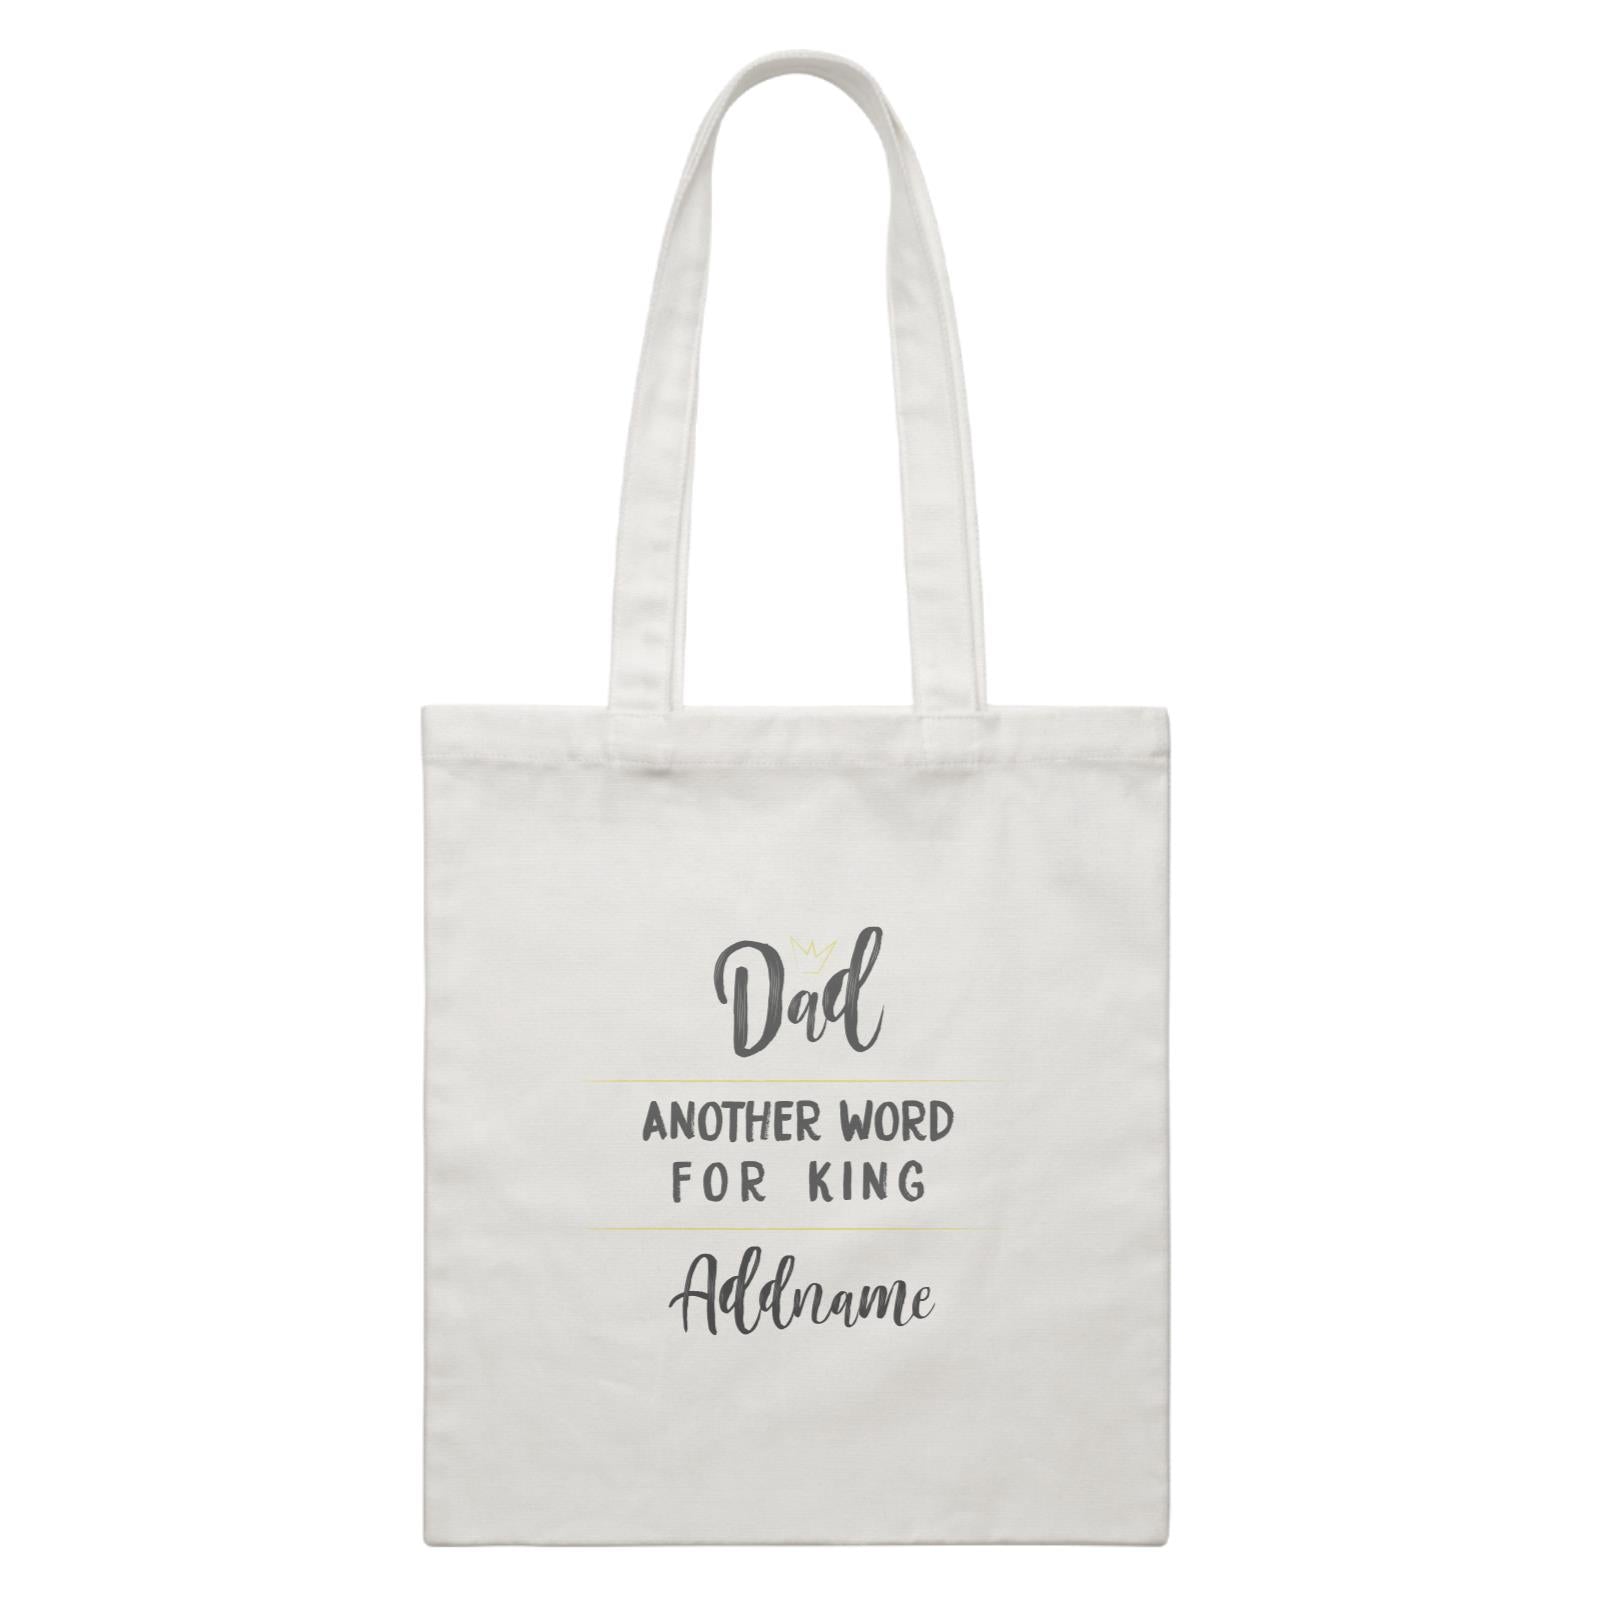 Another Word Family Dad Another Word For King Addname White Canvas Bag